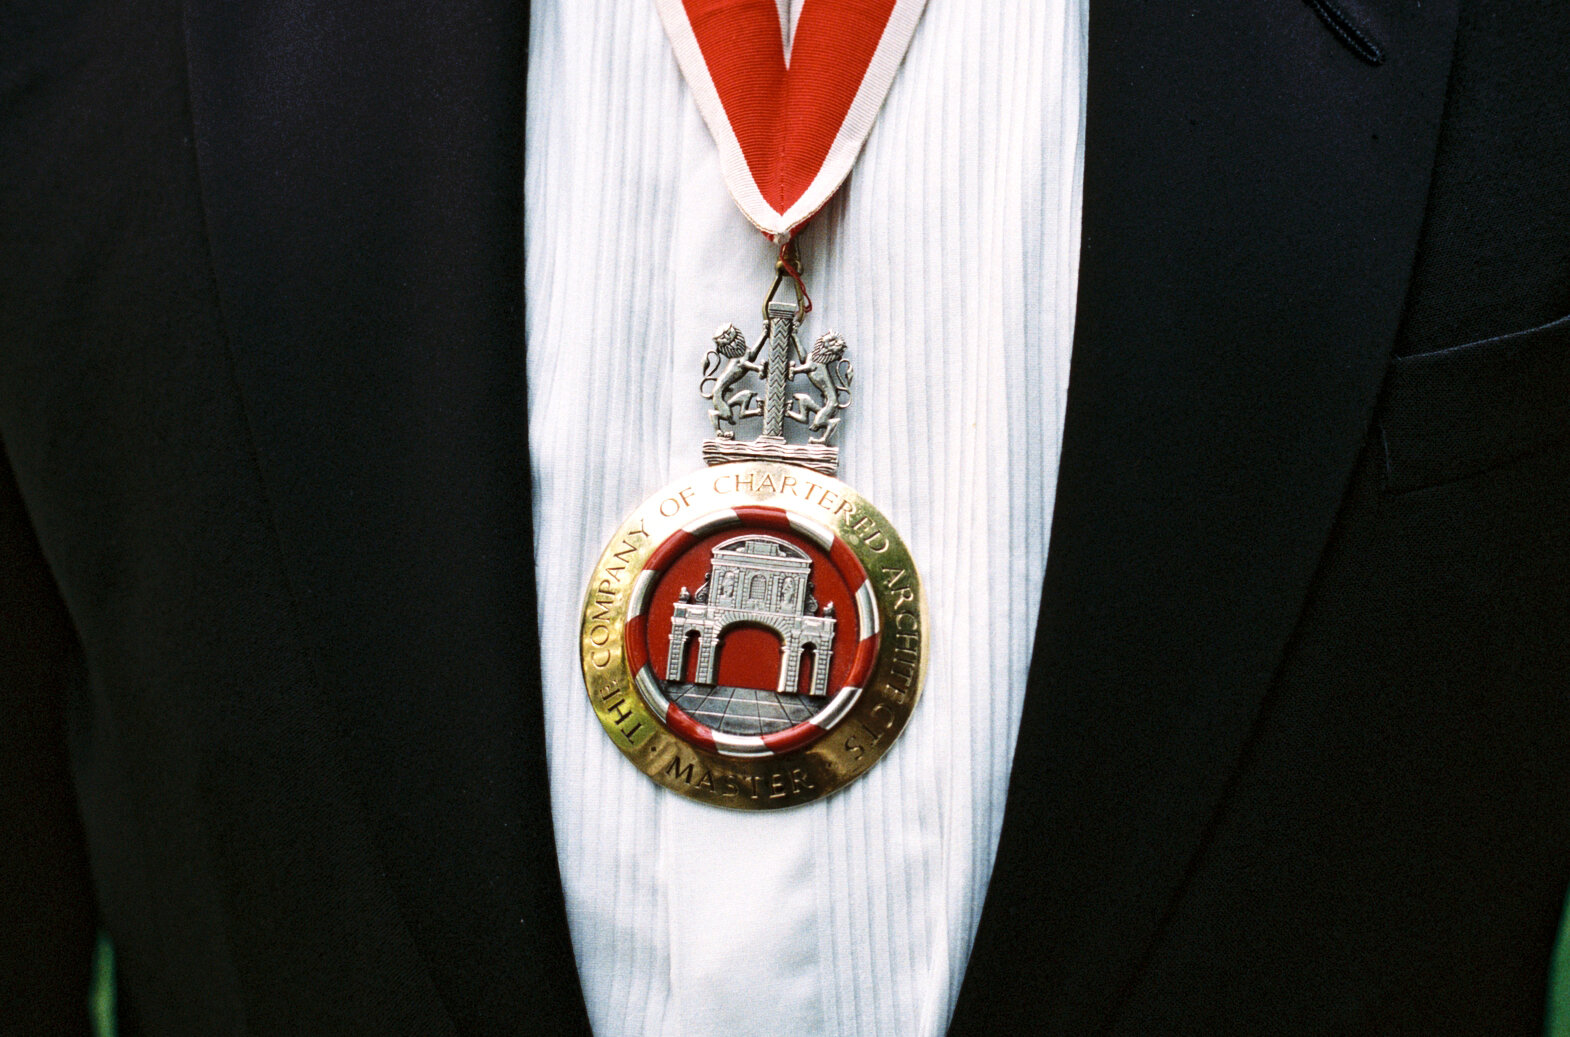 The Master's Badge